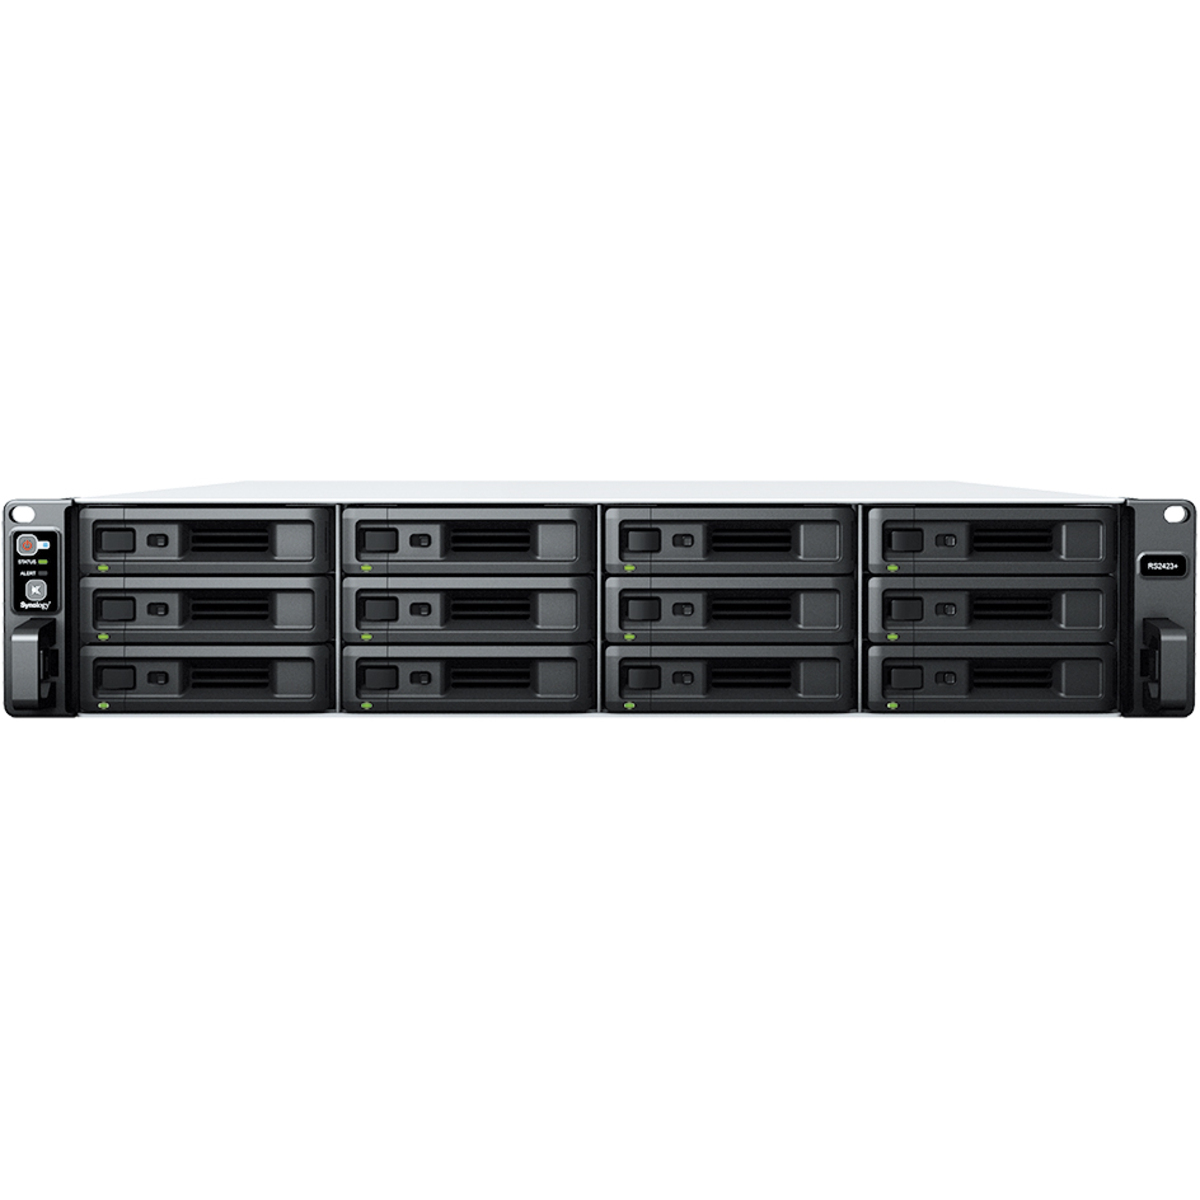 Synology RackStation RS2423+ 120tb 12-Bay RackMount Multimedia / Power User / Business NAS - Network Attached Storage Device 12x10tb Western Digital Ultrastar DC HC330 WUS721010ALE6L4 3.5 7200rpm SATA 6Gb/s HDD ENTERPRISE Class Drives Installed - Burn-In Tested RackStation RS2423+